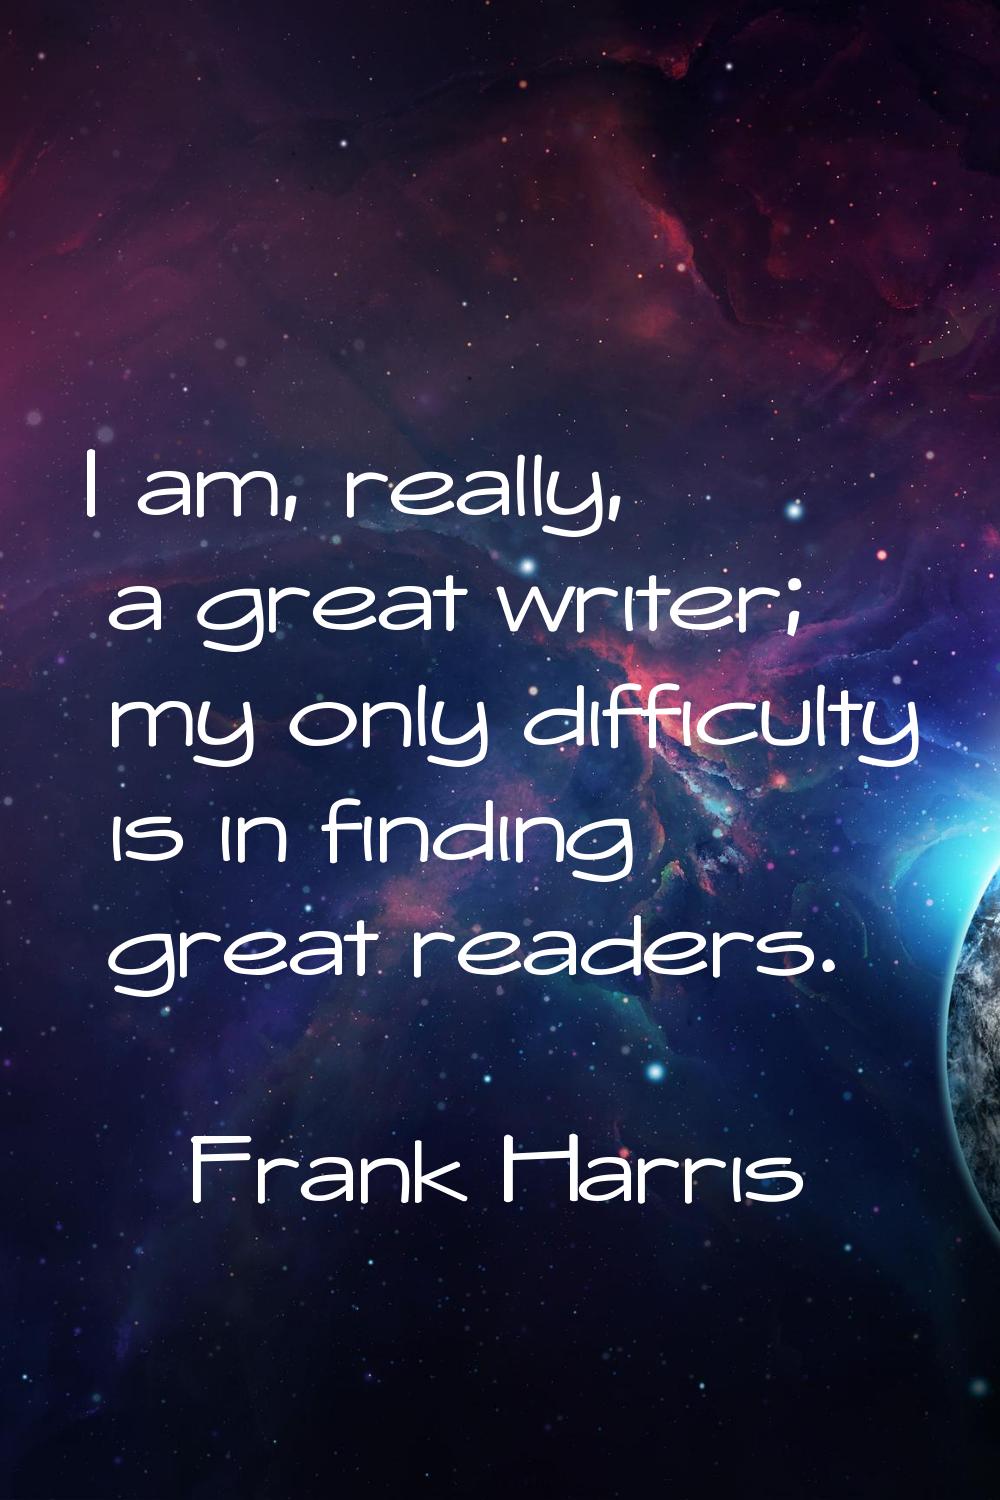 I am, really, a great writer; my only difficulty is in finding great readers.